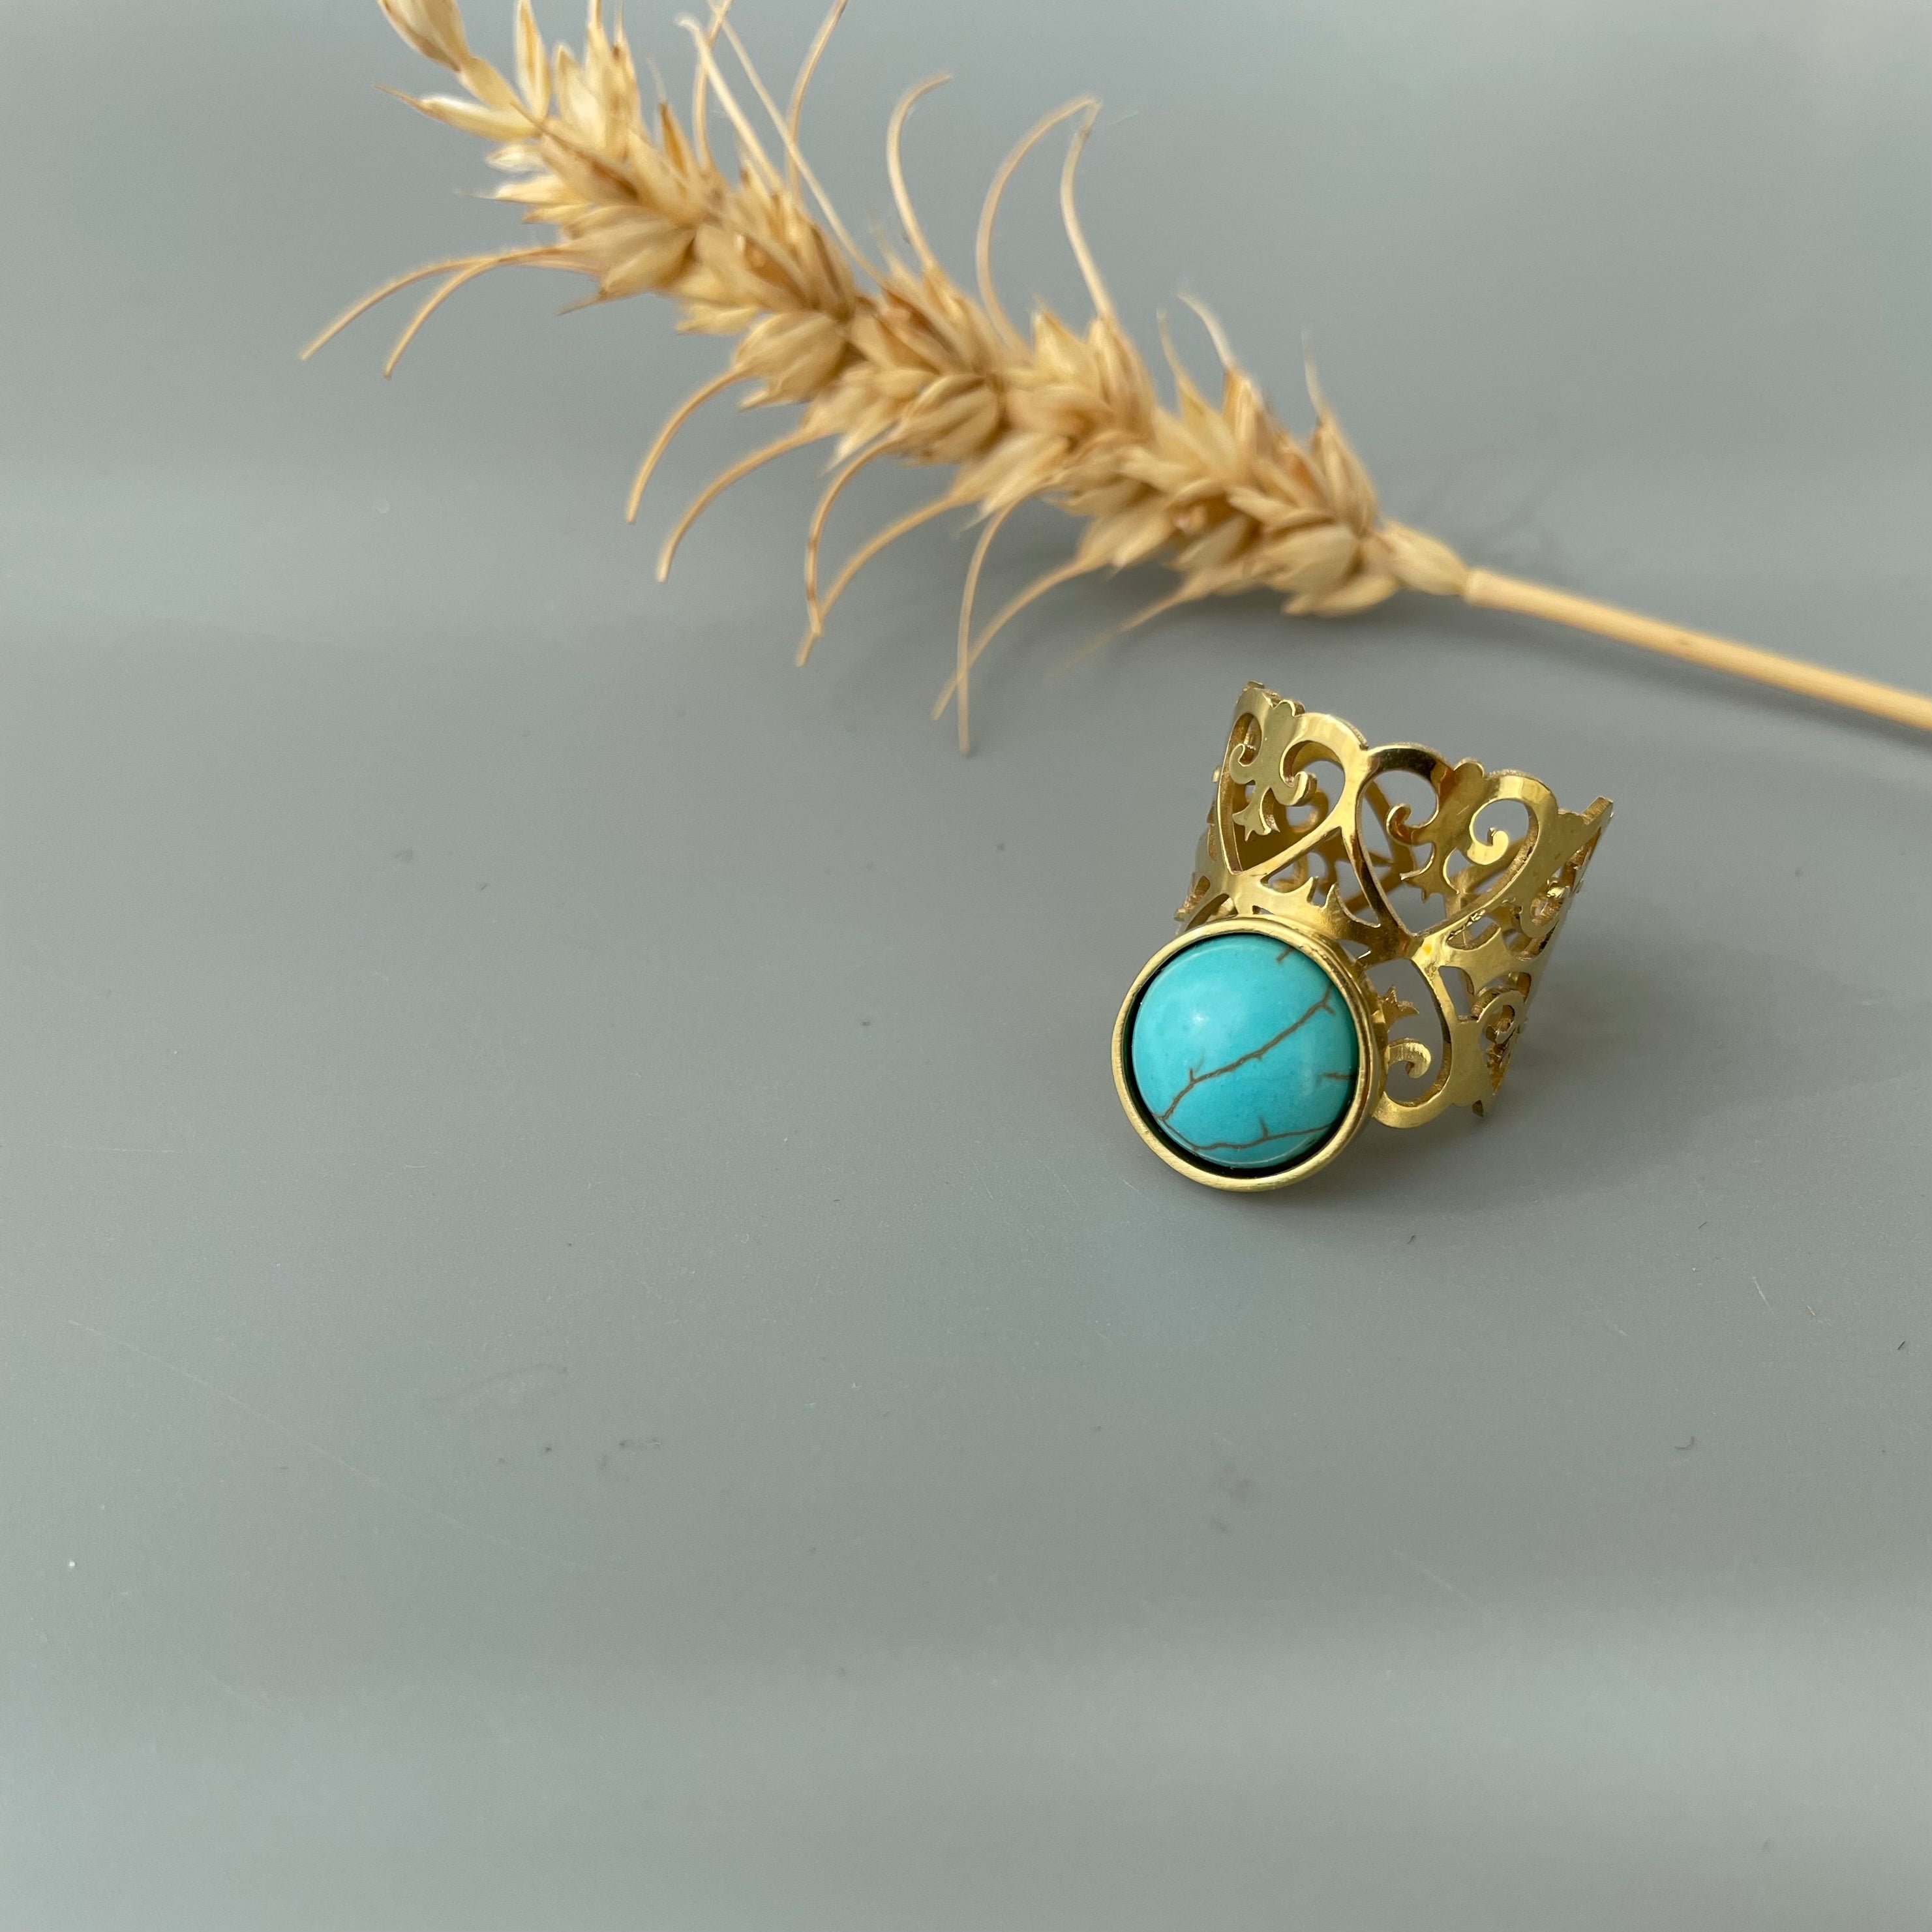 Handmade Persian Ring with Turquoise